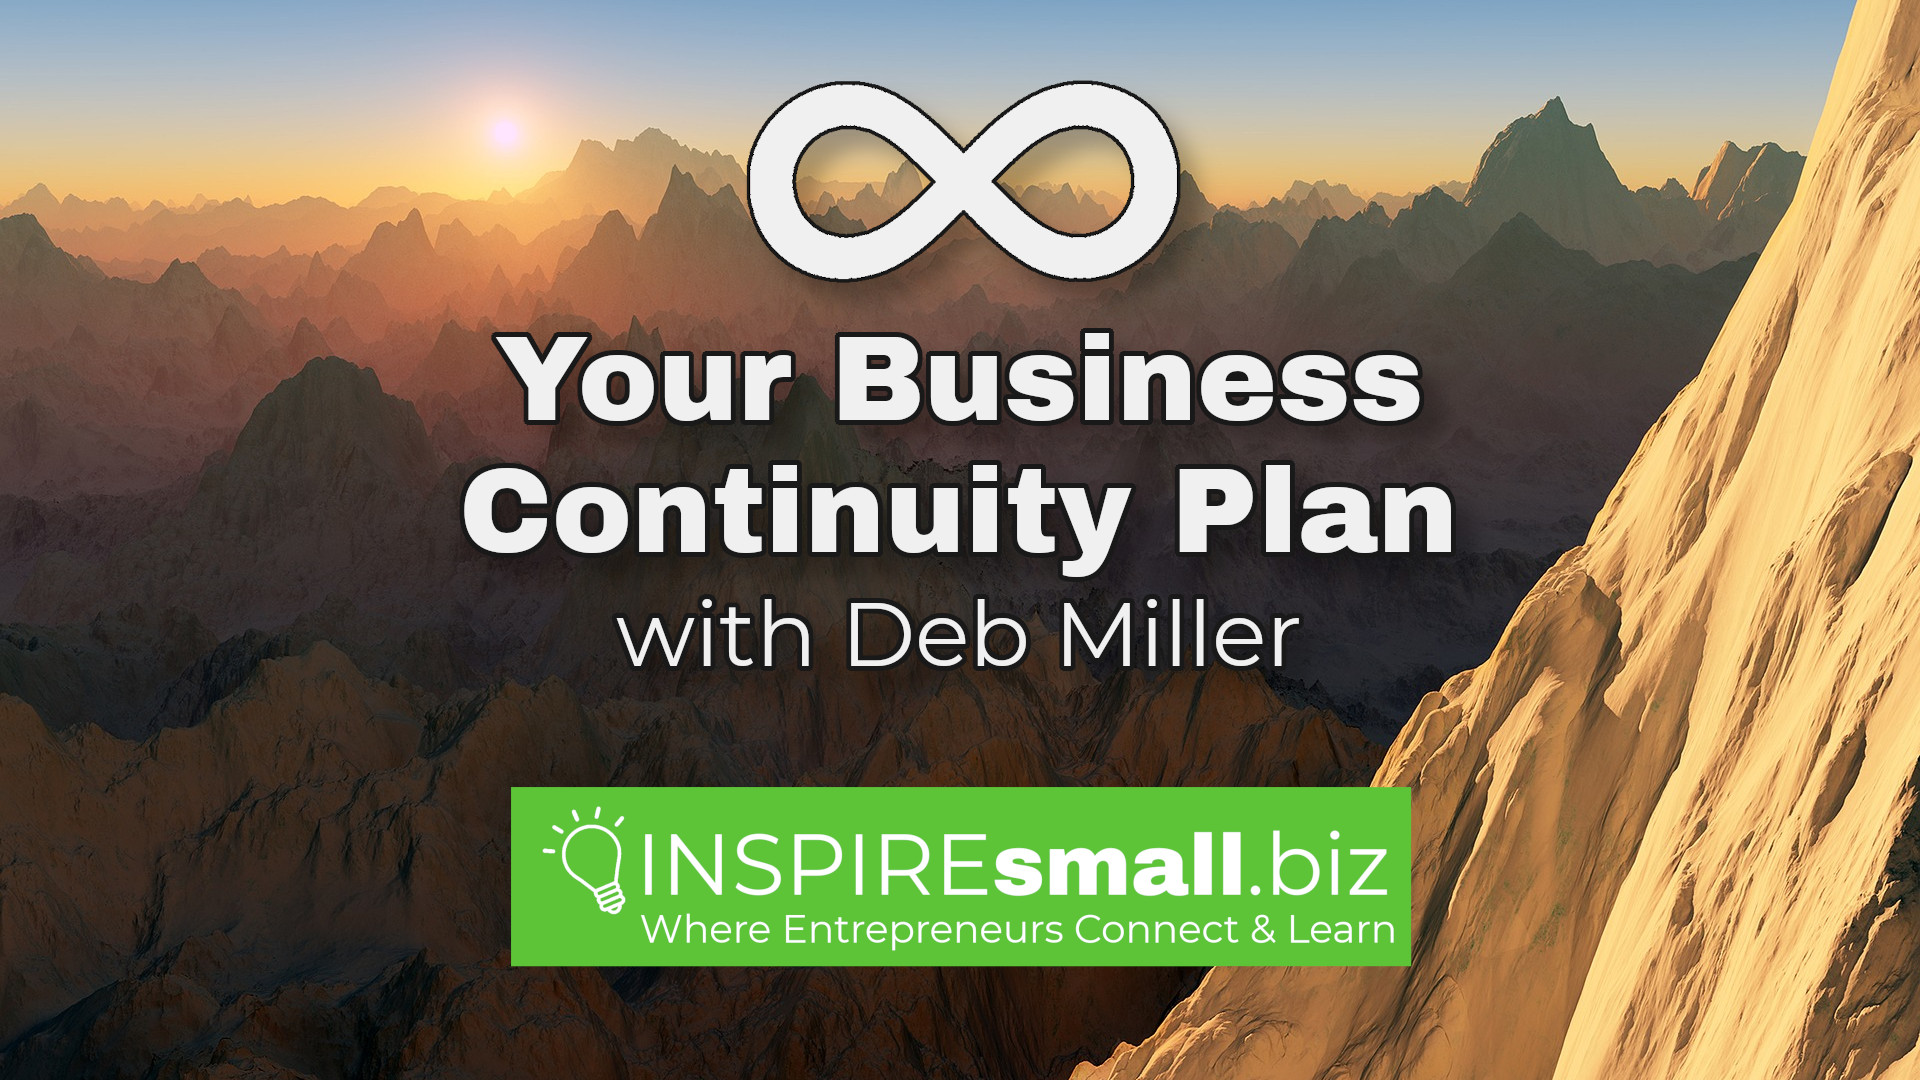 Your Business Continuity Plan with Deb Miller, hosted by INSPIREsmall.biz, in text over a wide, sweeping landscape, with a rock mountain in the front right, and trees in the distance, with the sun setting behind them on the left side.